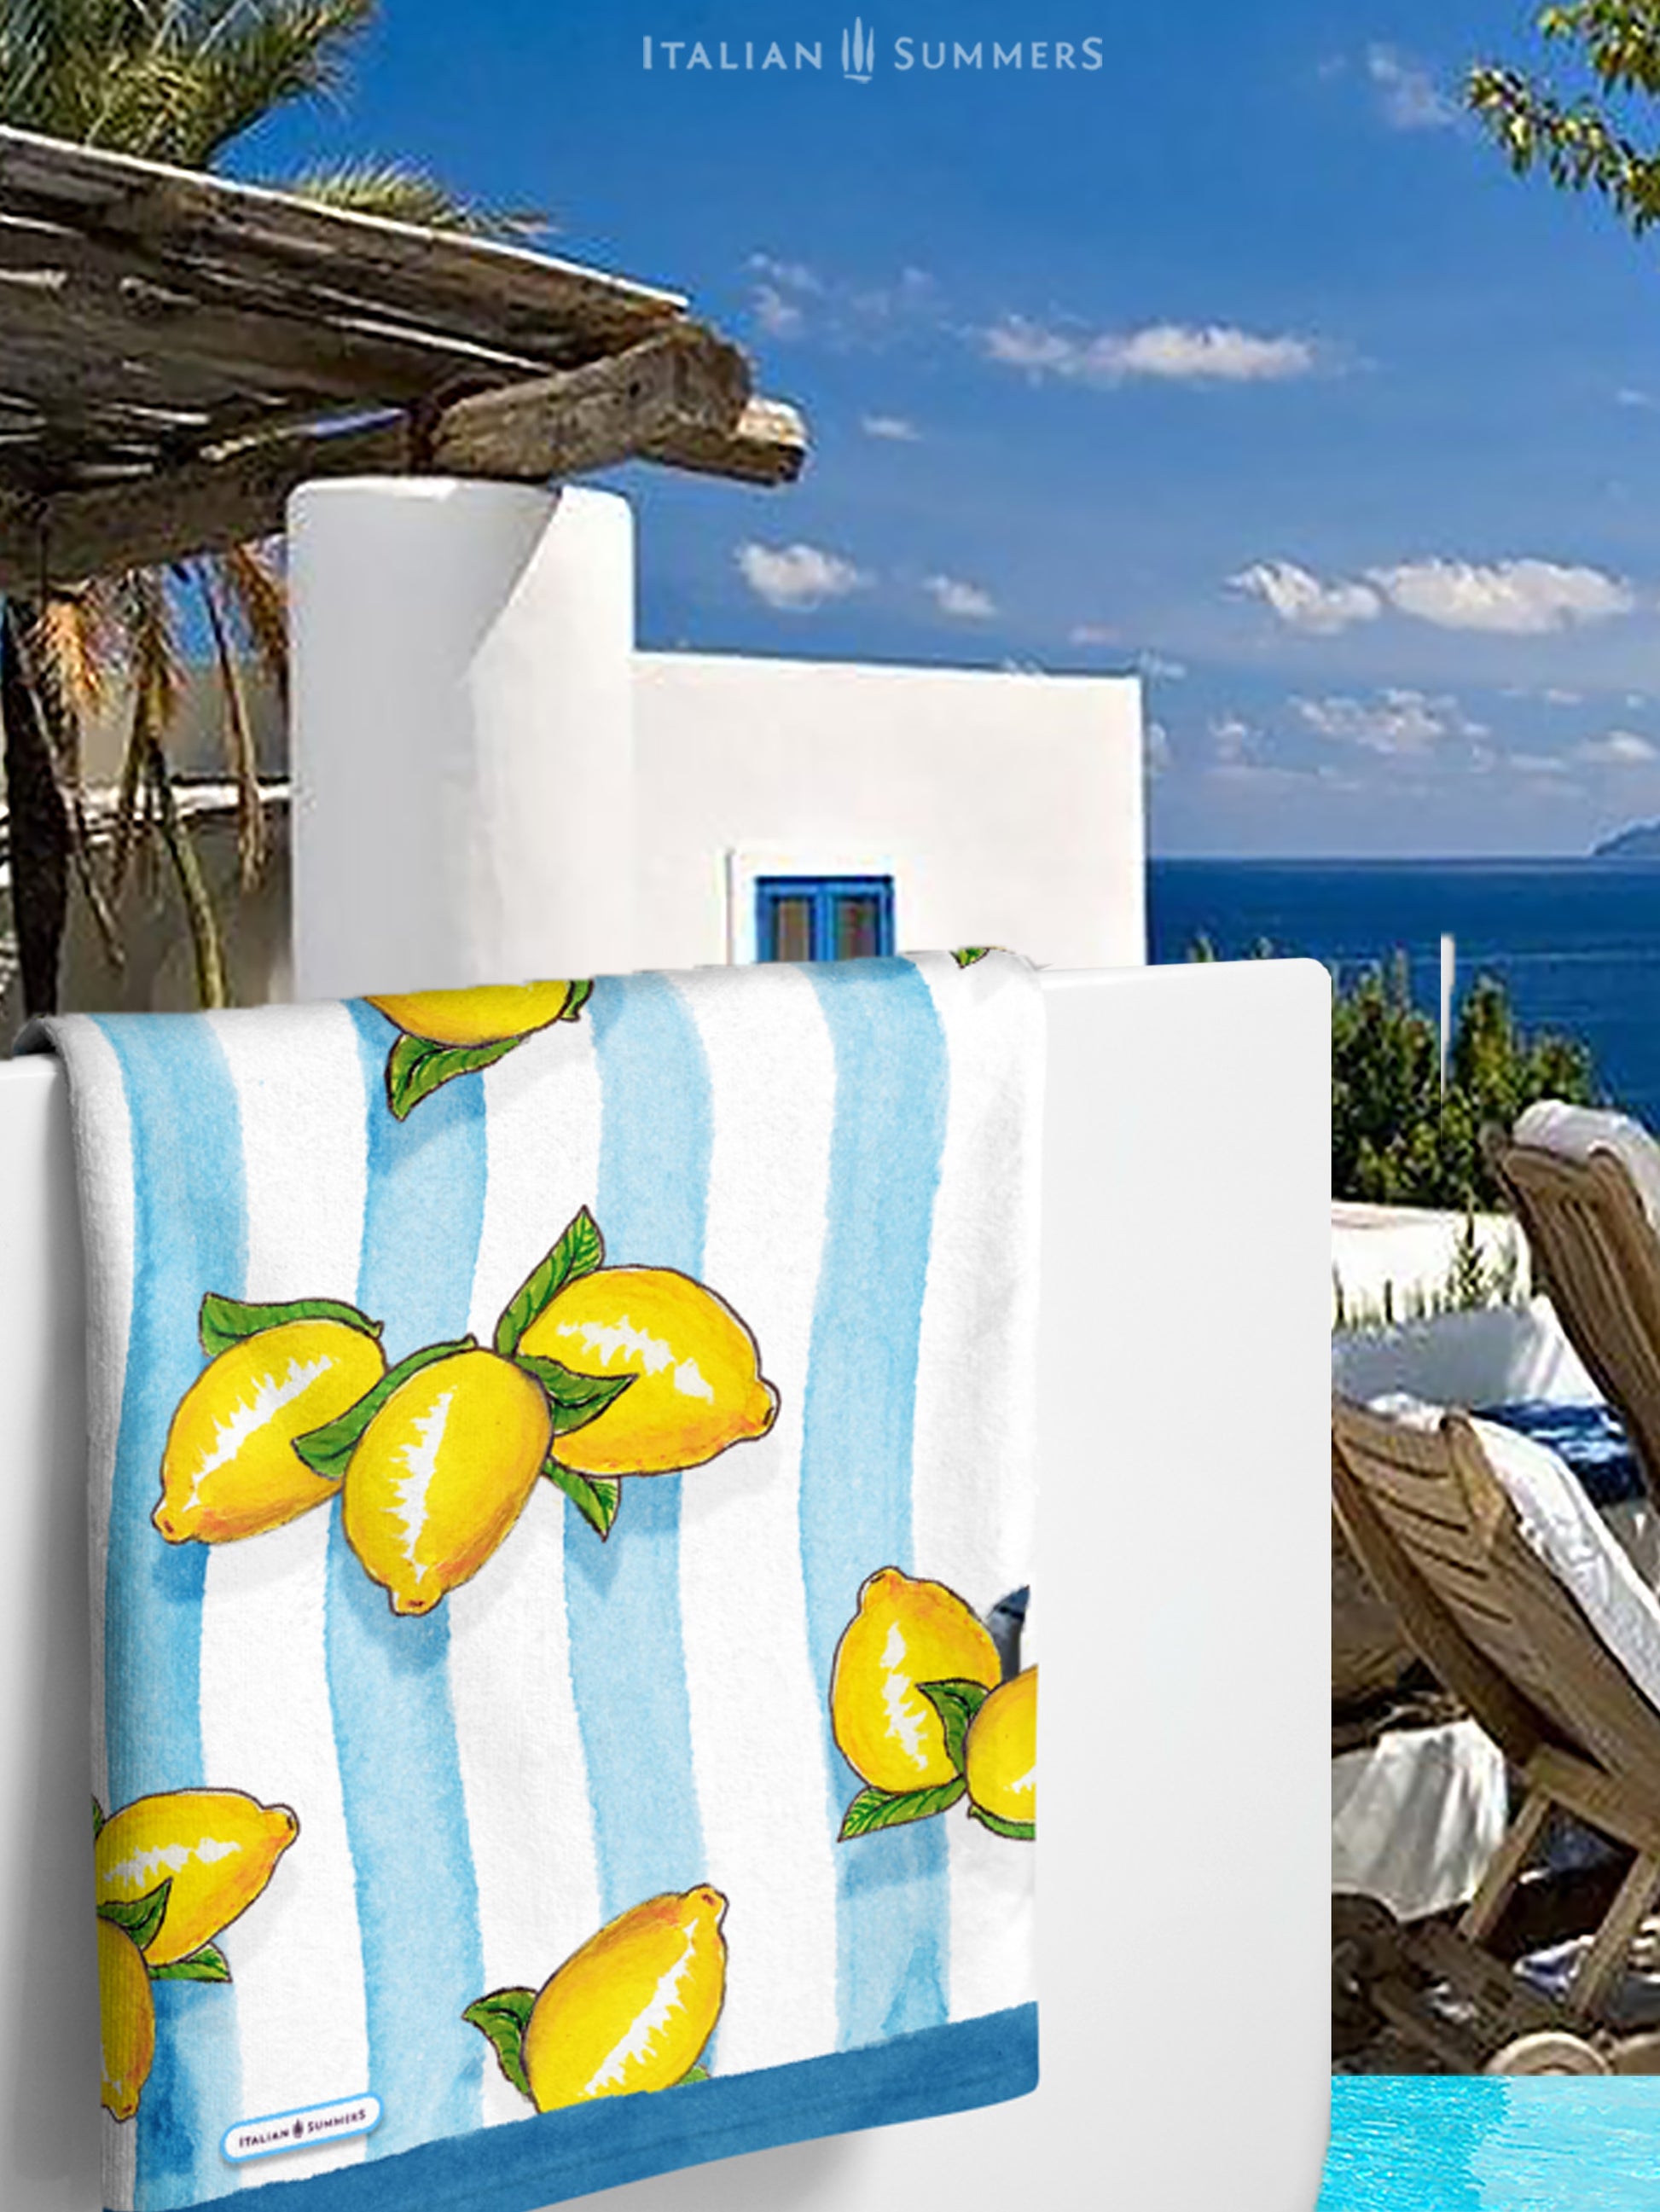 A large beach towel with printed Sorrento lemons on a background of aqua blue water color stripes. A happy and sunny Italian summer feeling. Made by Italian Summers